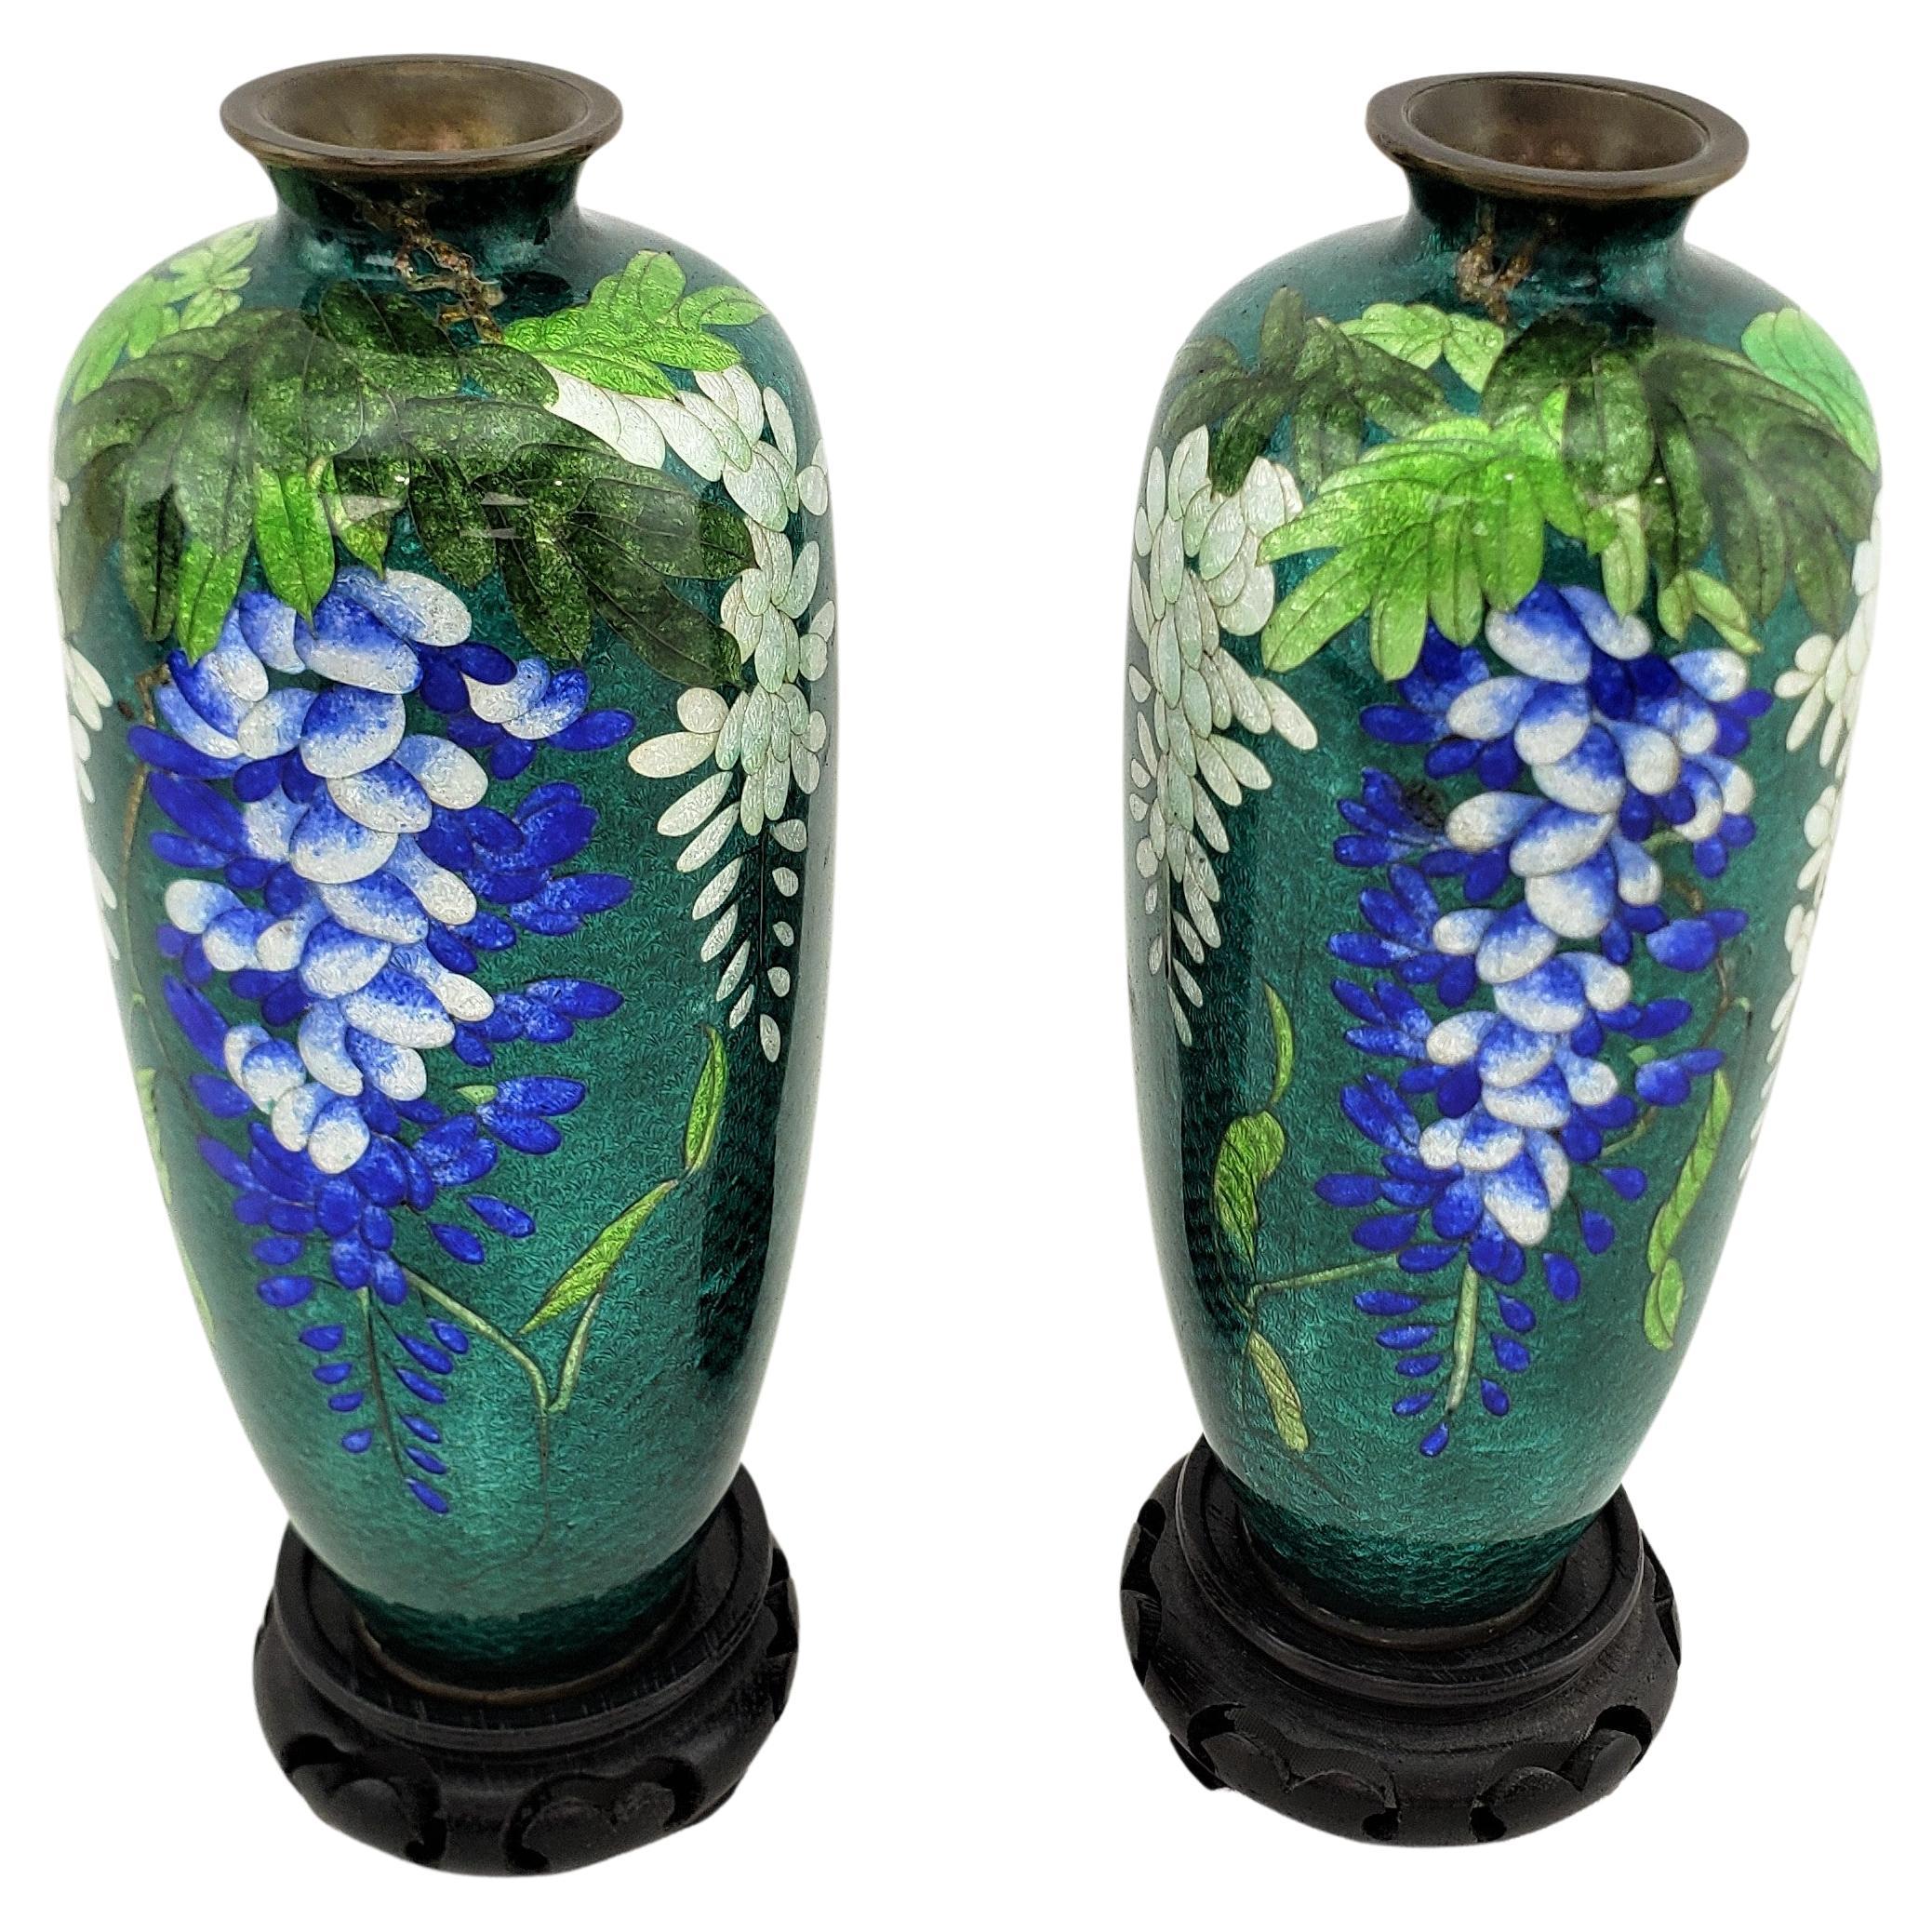 Pair of Antique Japanese Cloisonne Vases with Floral Decoration & Wooden Stands For Sale